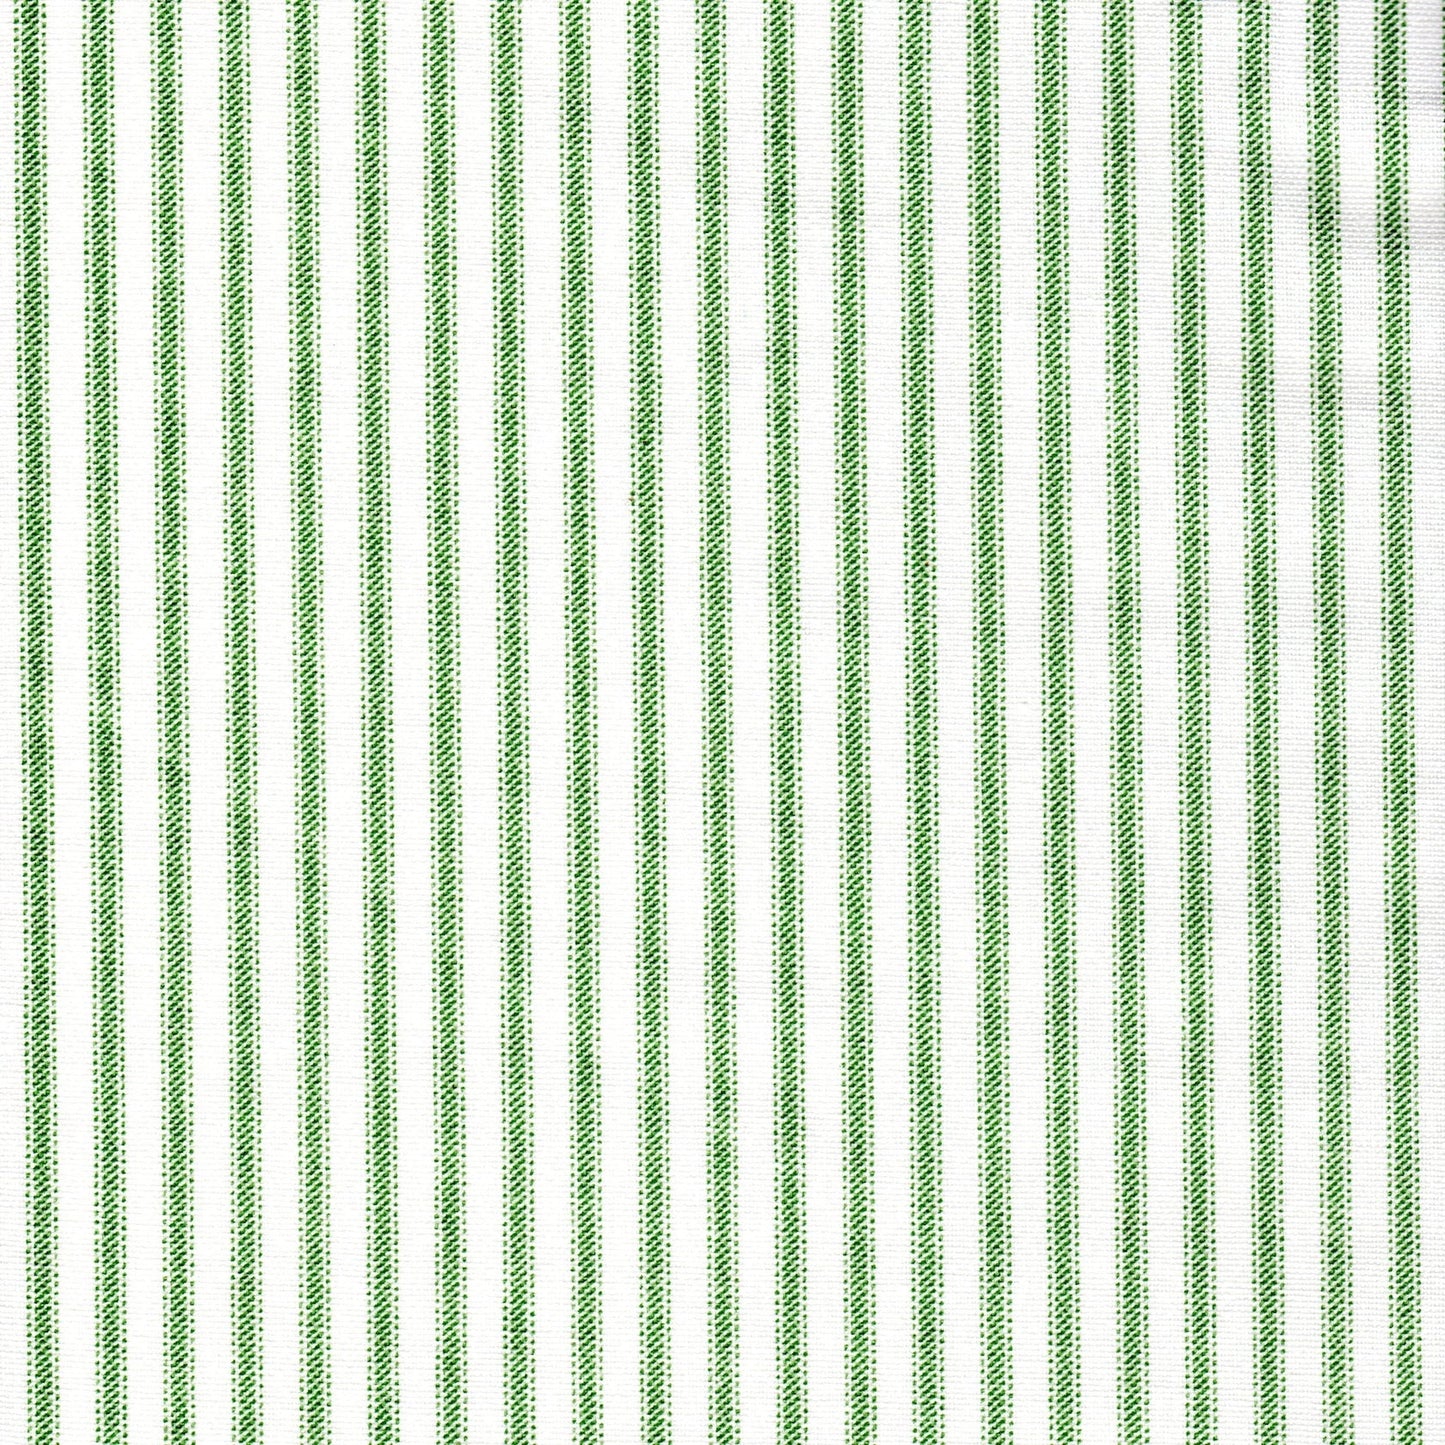 tailored bedskirt in Classic Pine Green Ticking Stripe on White